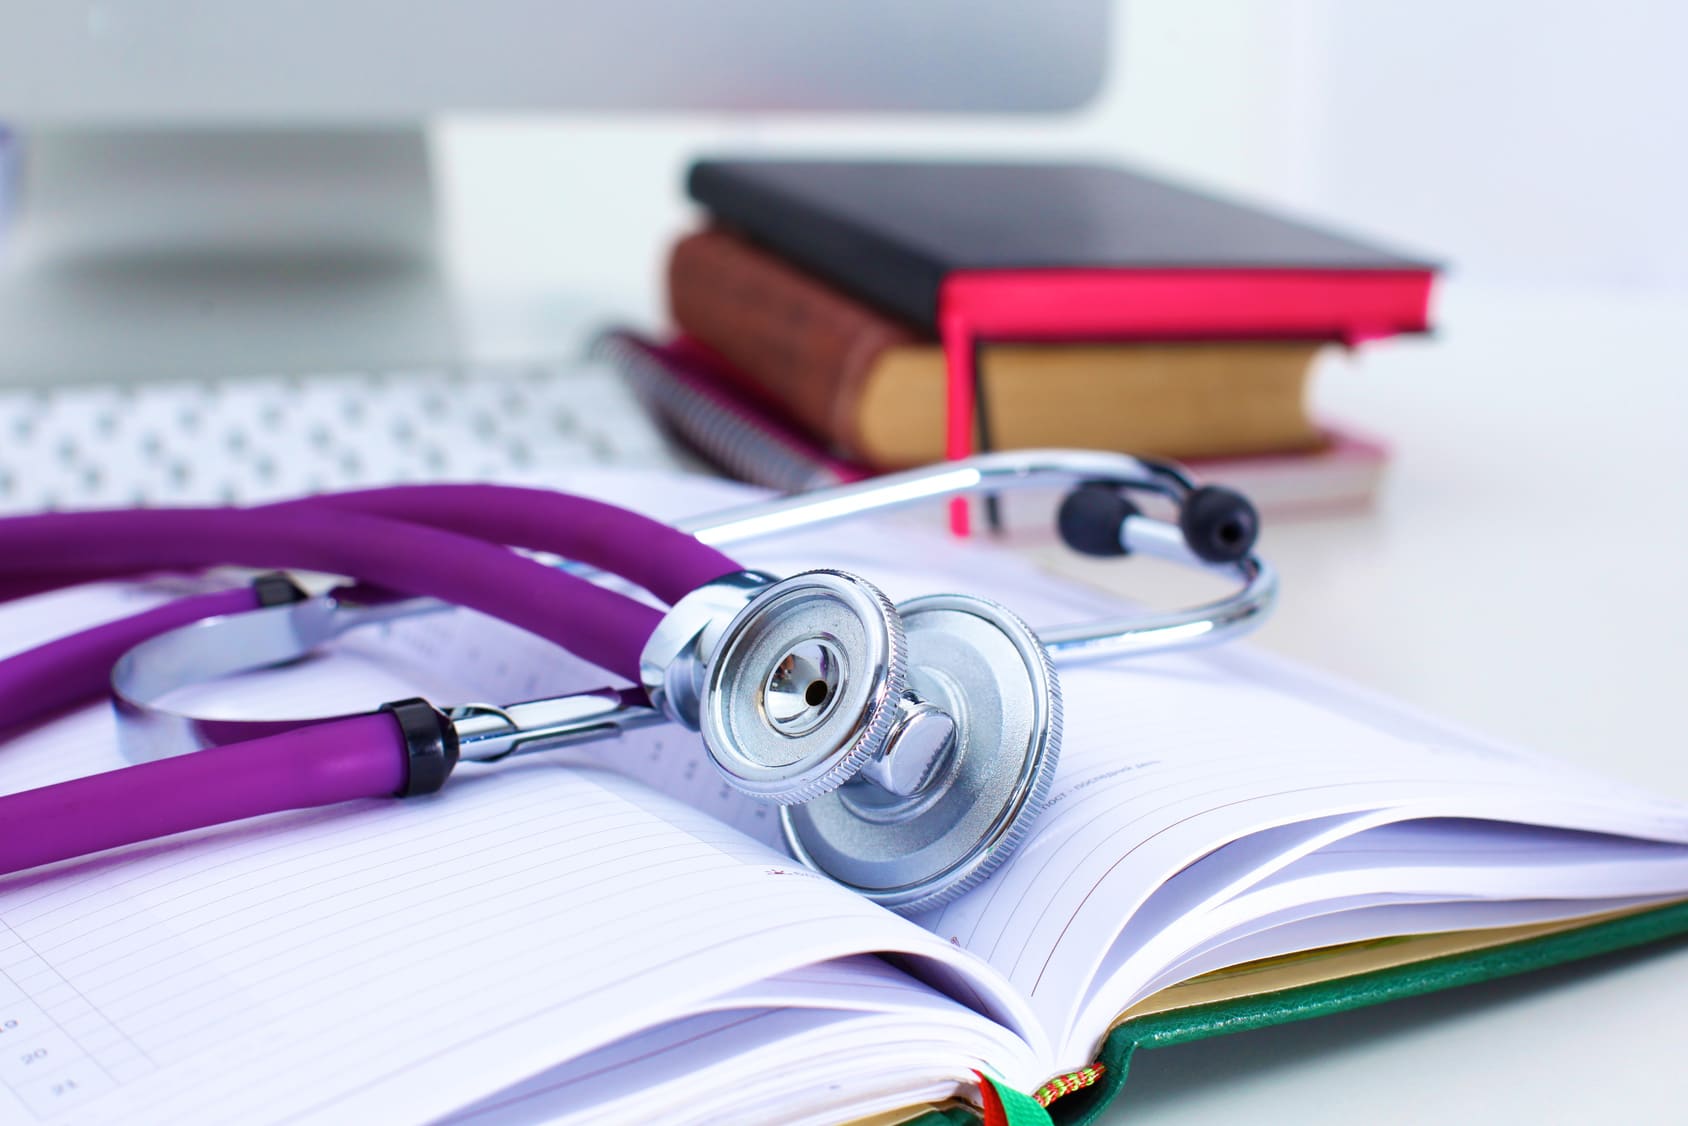 Stethoscope lying on an open book.